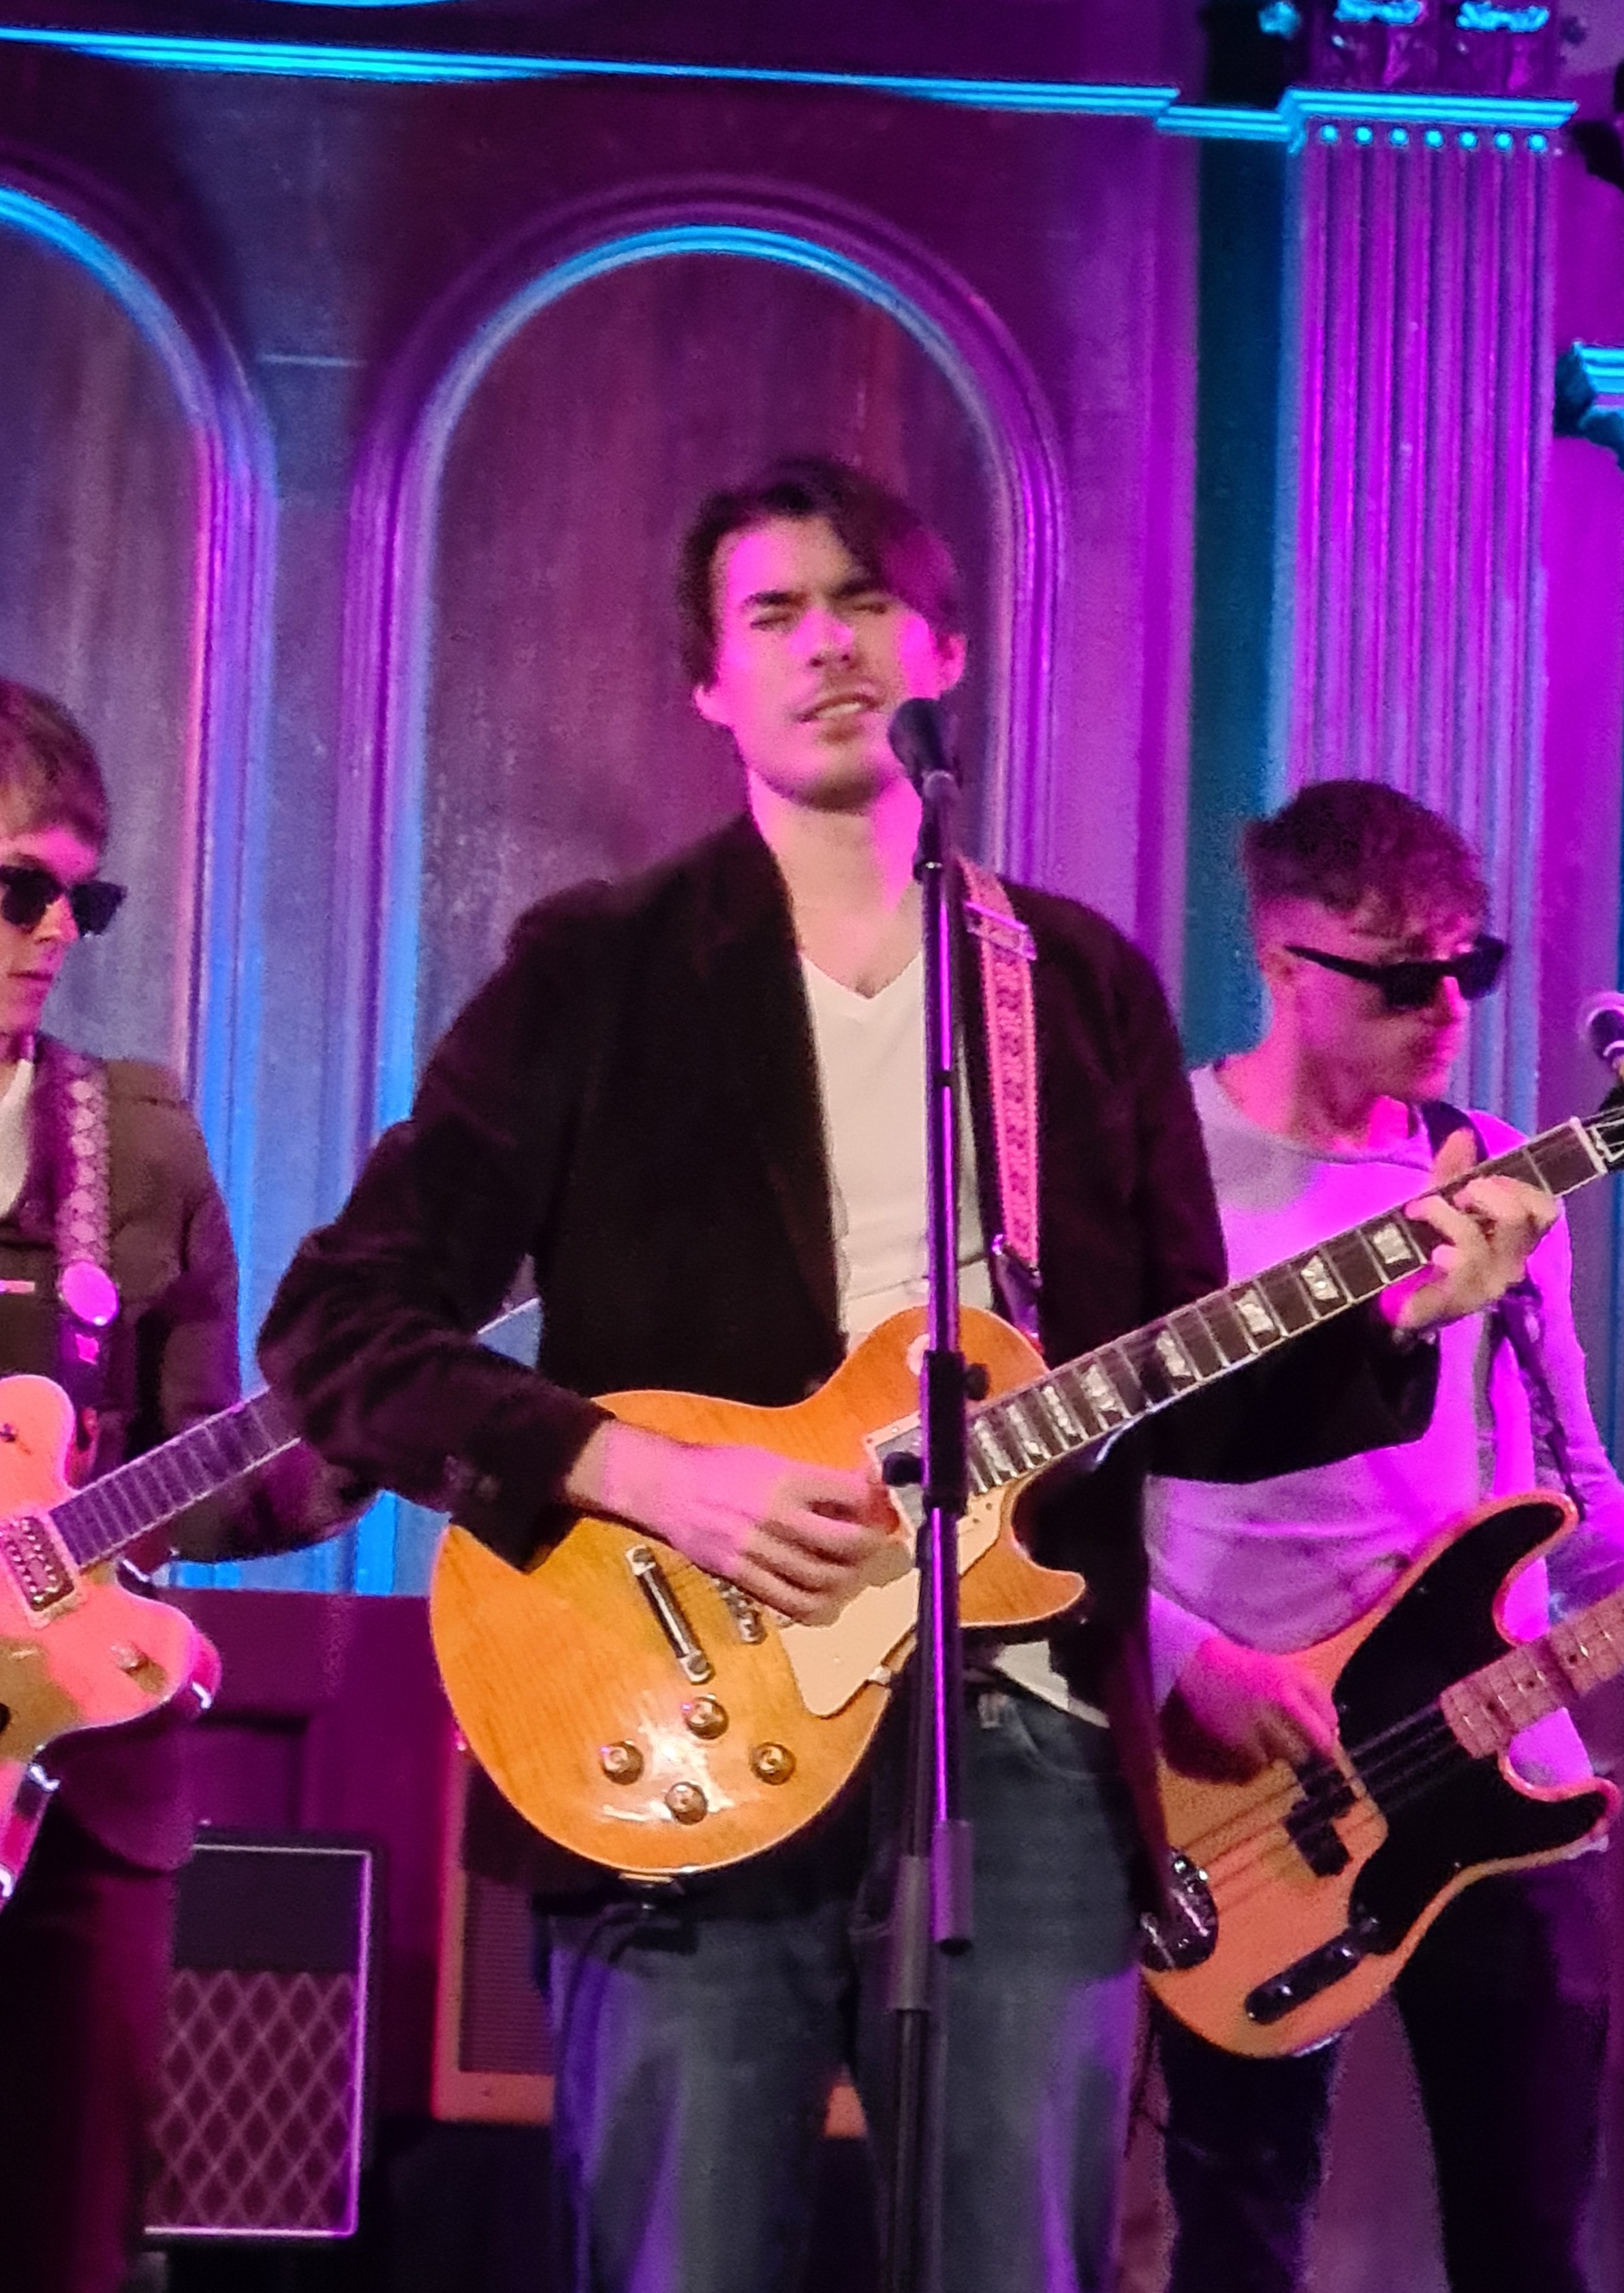 Gig review: CONNOR SELBY – Amazing Grace, London, 16 May 2023